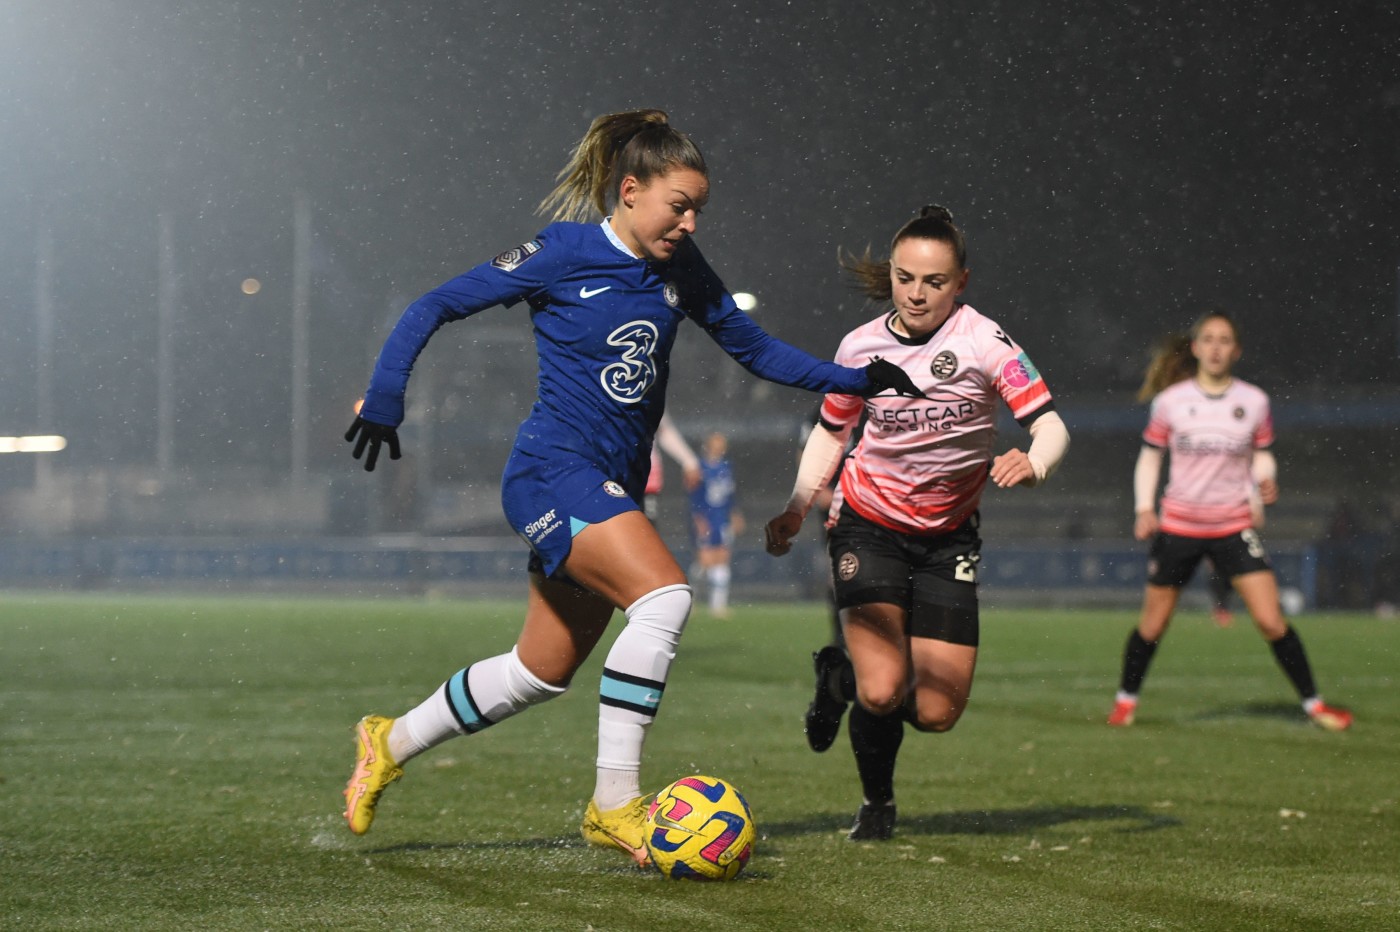 Women's Super League: Final day of 2022/23 season brought forward to May 27, Football News